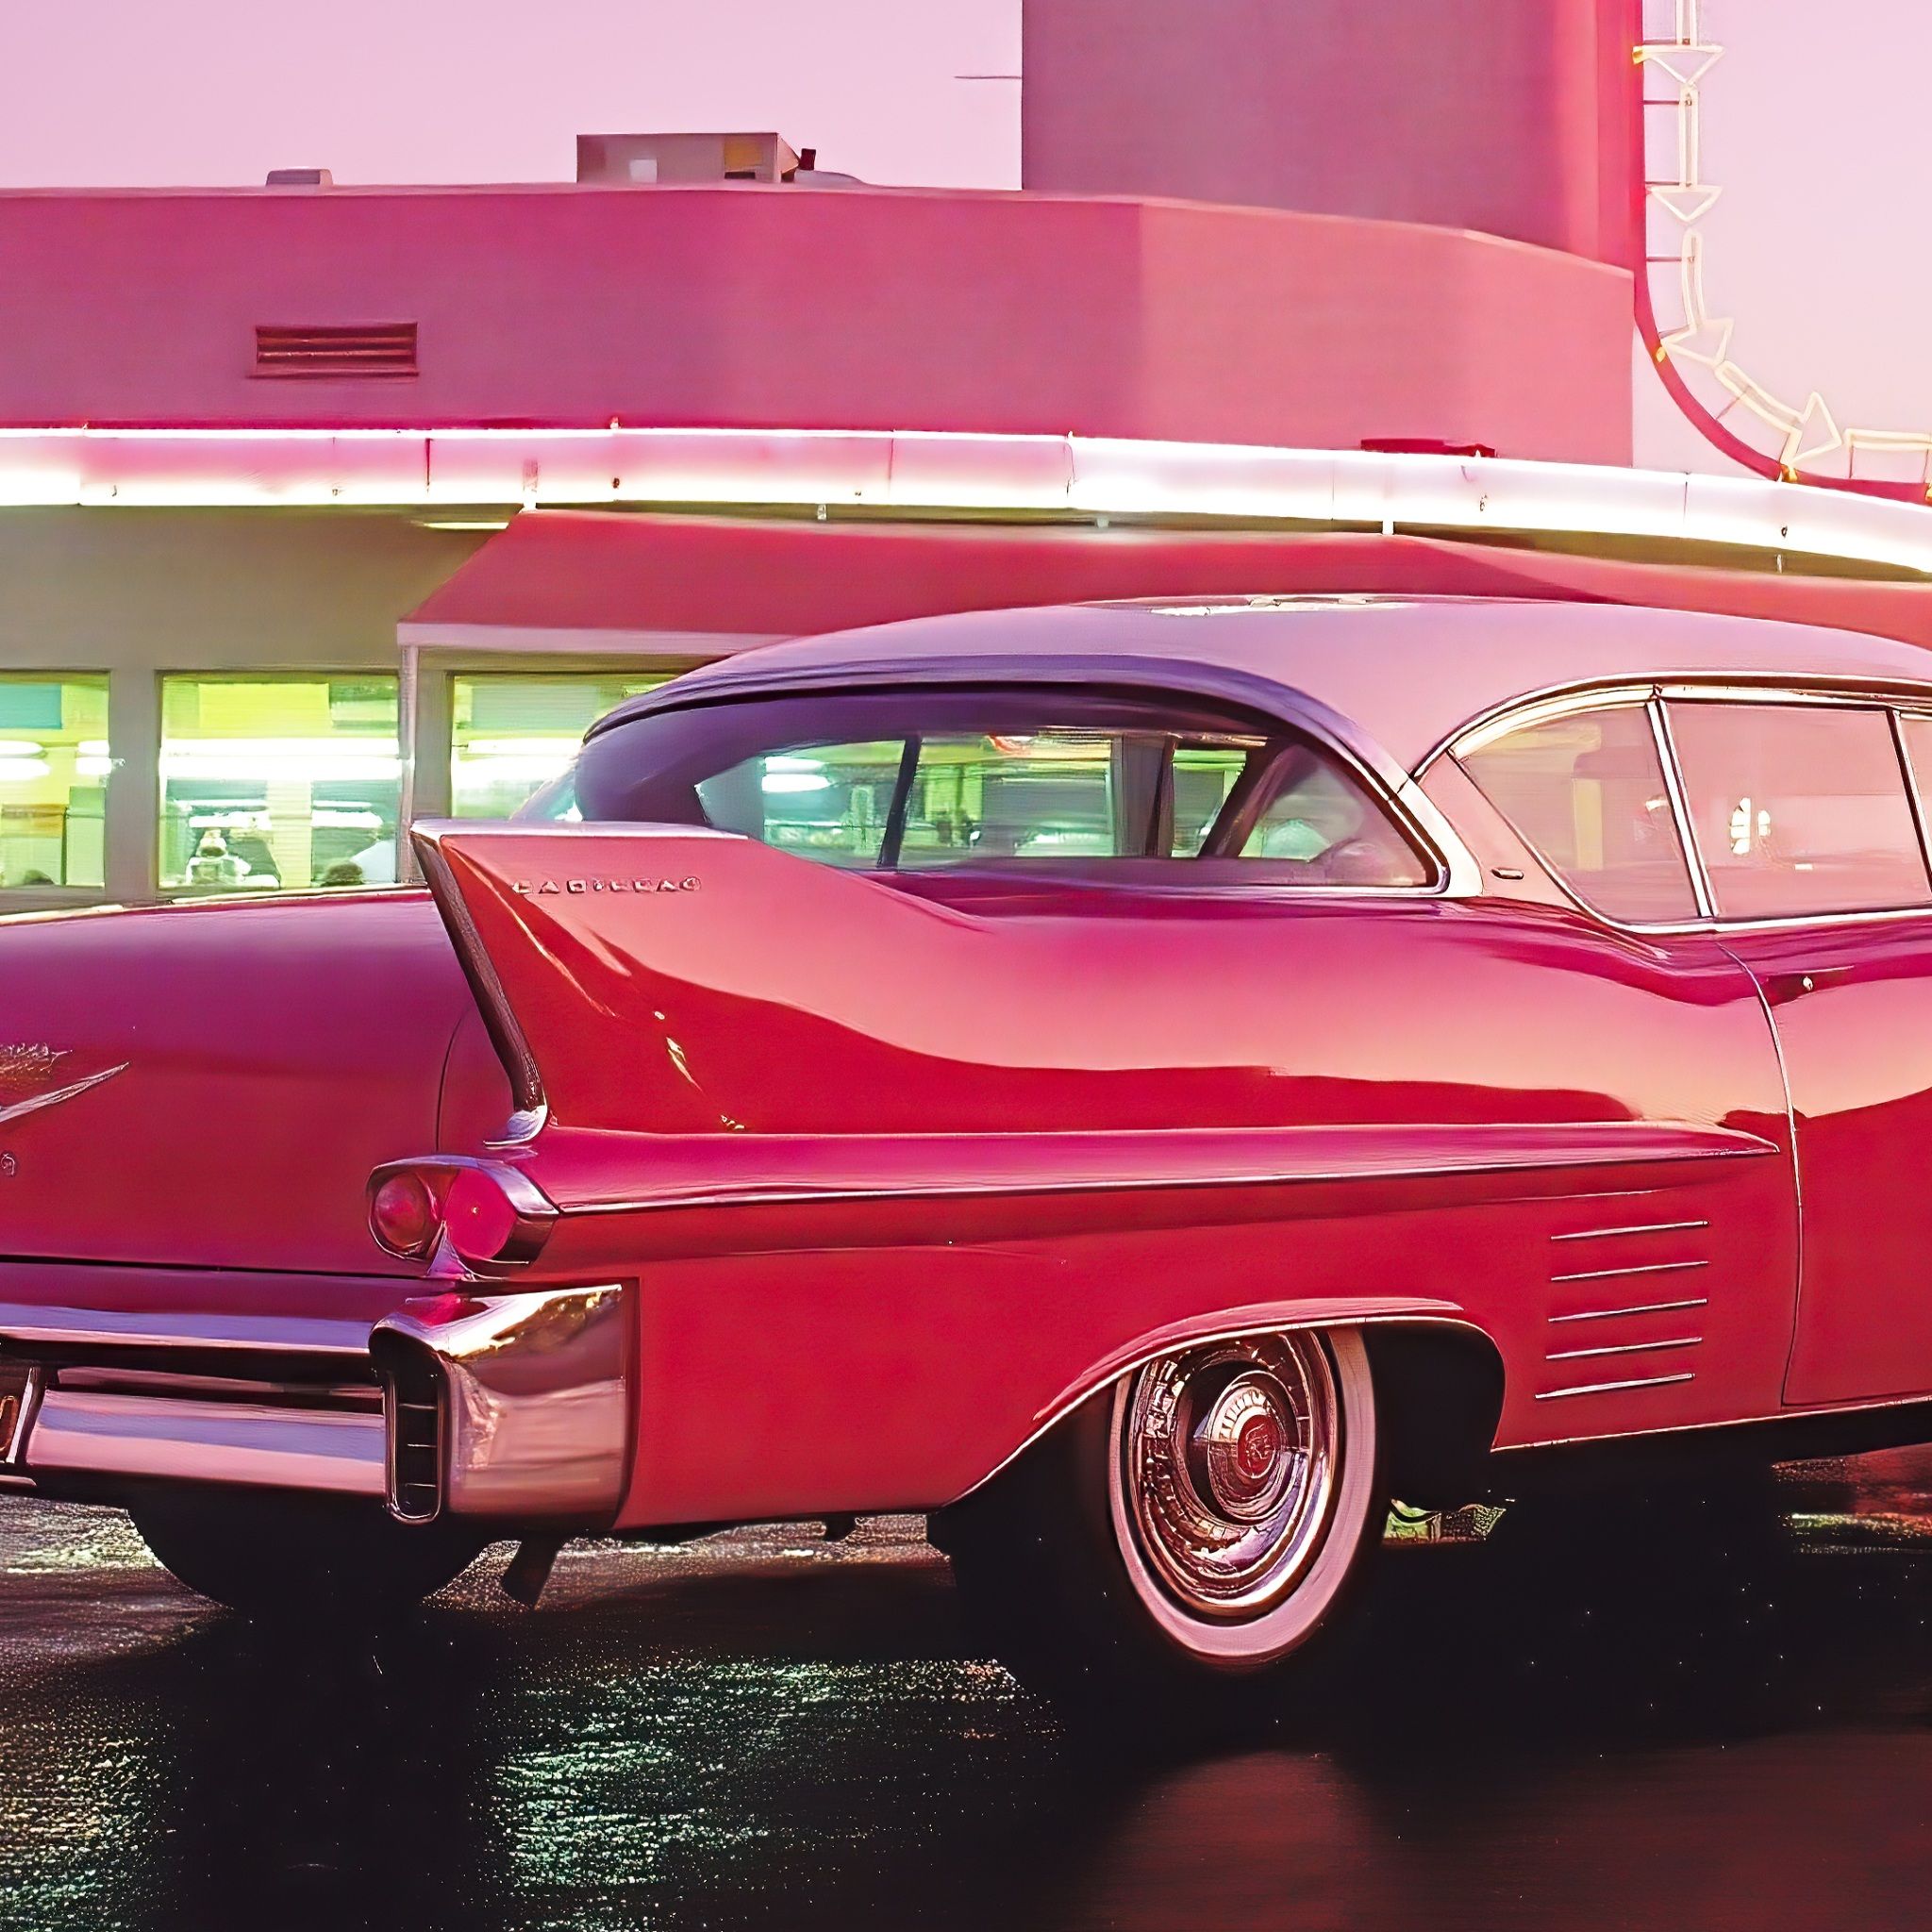 A red 1950s car parked outside a diner - 50s